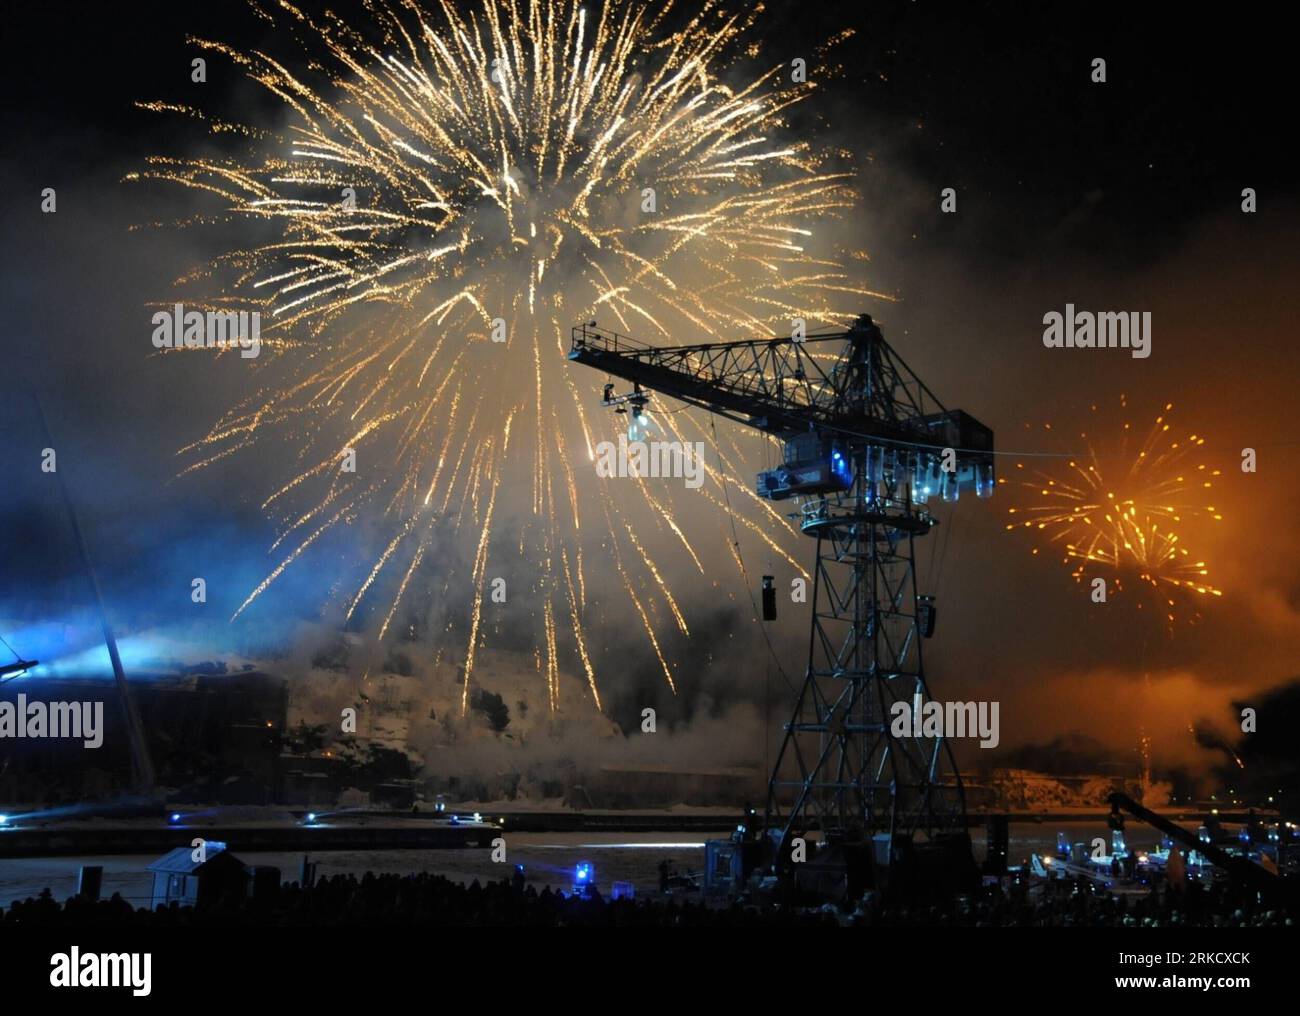 - Alamy 2011 images stock photography and 15 hi-res 01